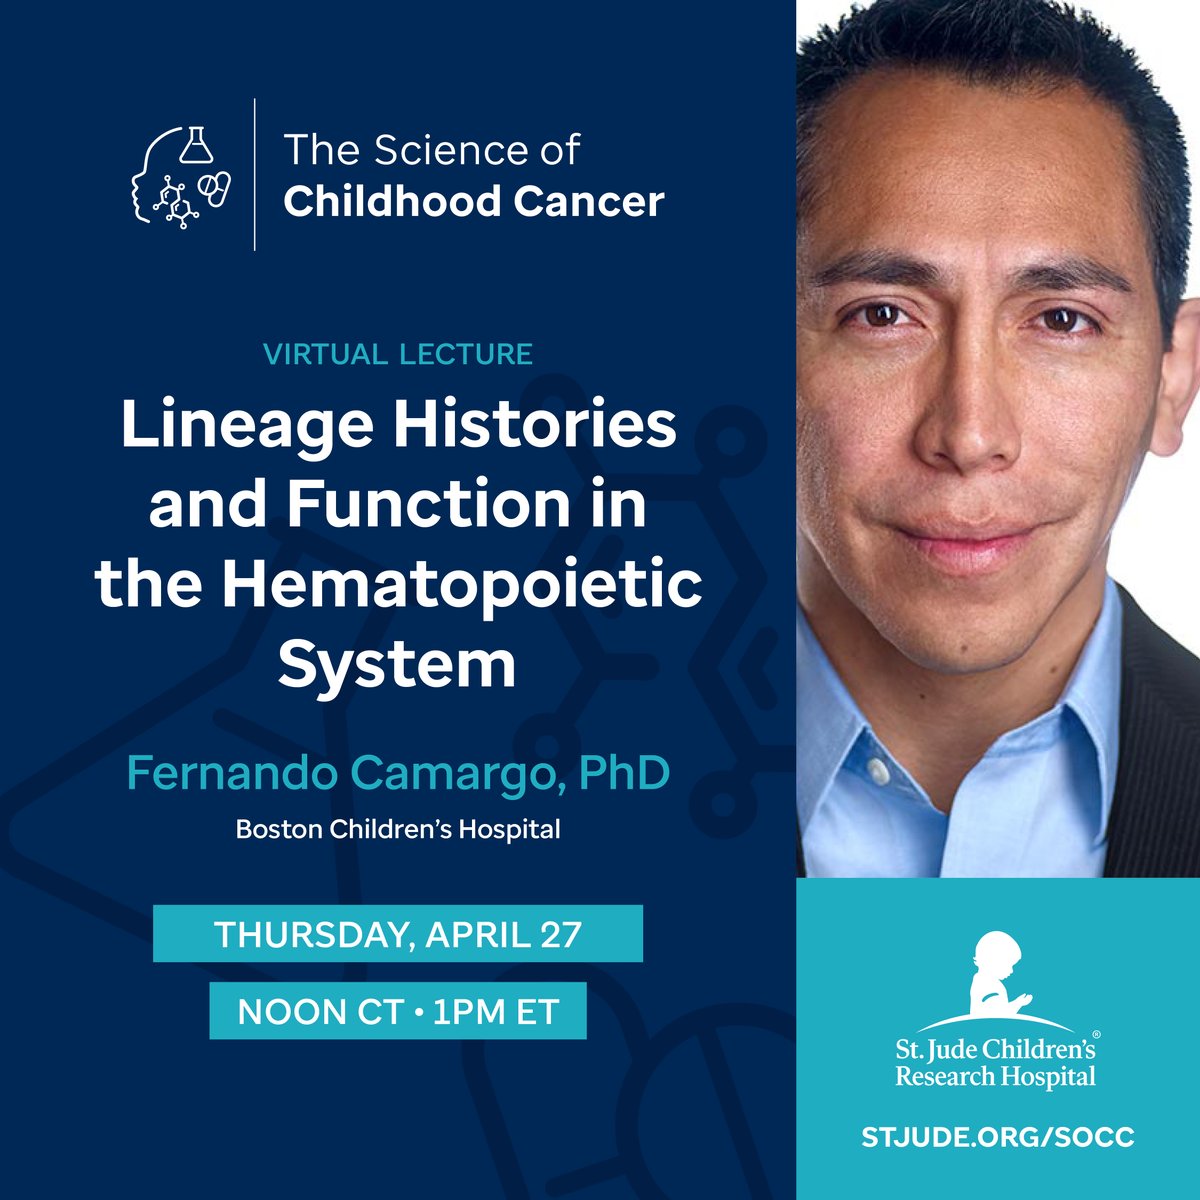 Be sure to join us today at noon CT/1 pm ET when @FD_Camargo of @BCHStemCell presents “Lineage Histories and Function in the Hematopoietic System.” There’s still time to register. bit.ly/SOCC23-TWORG #SOCC23